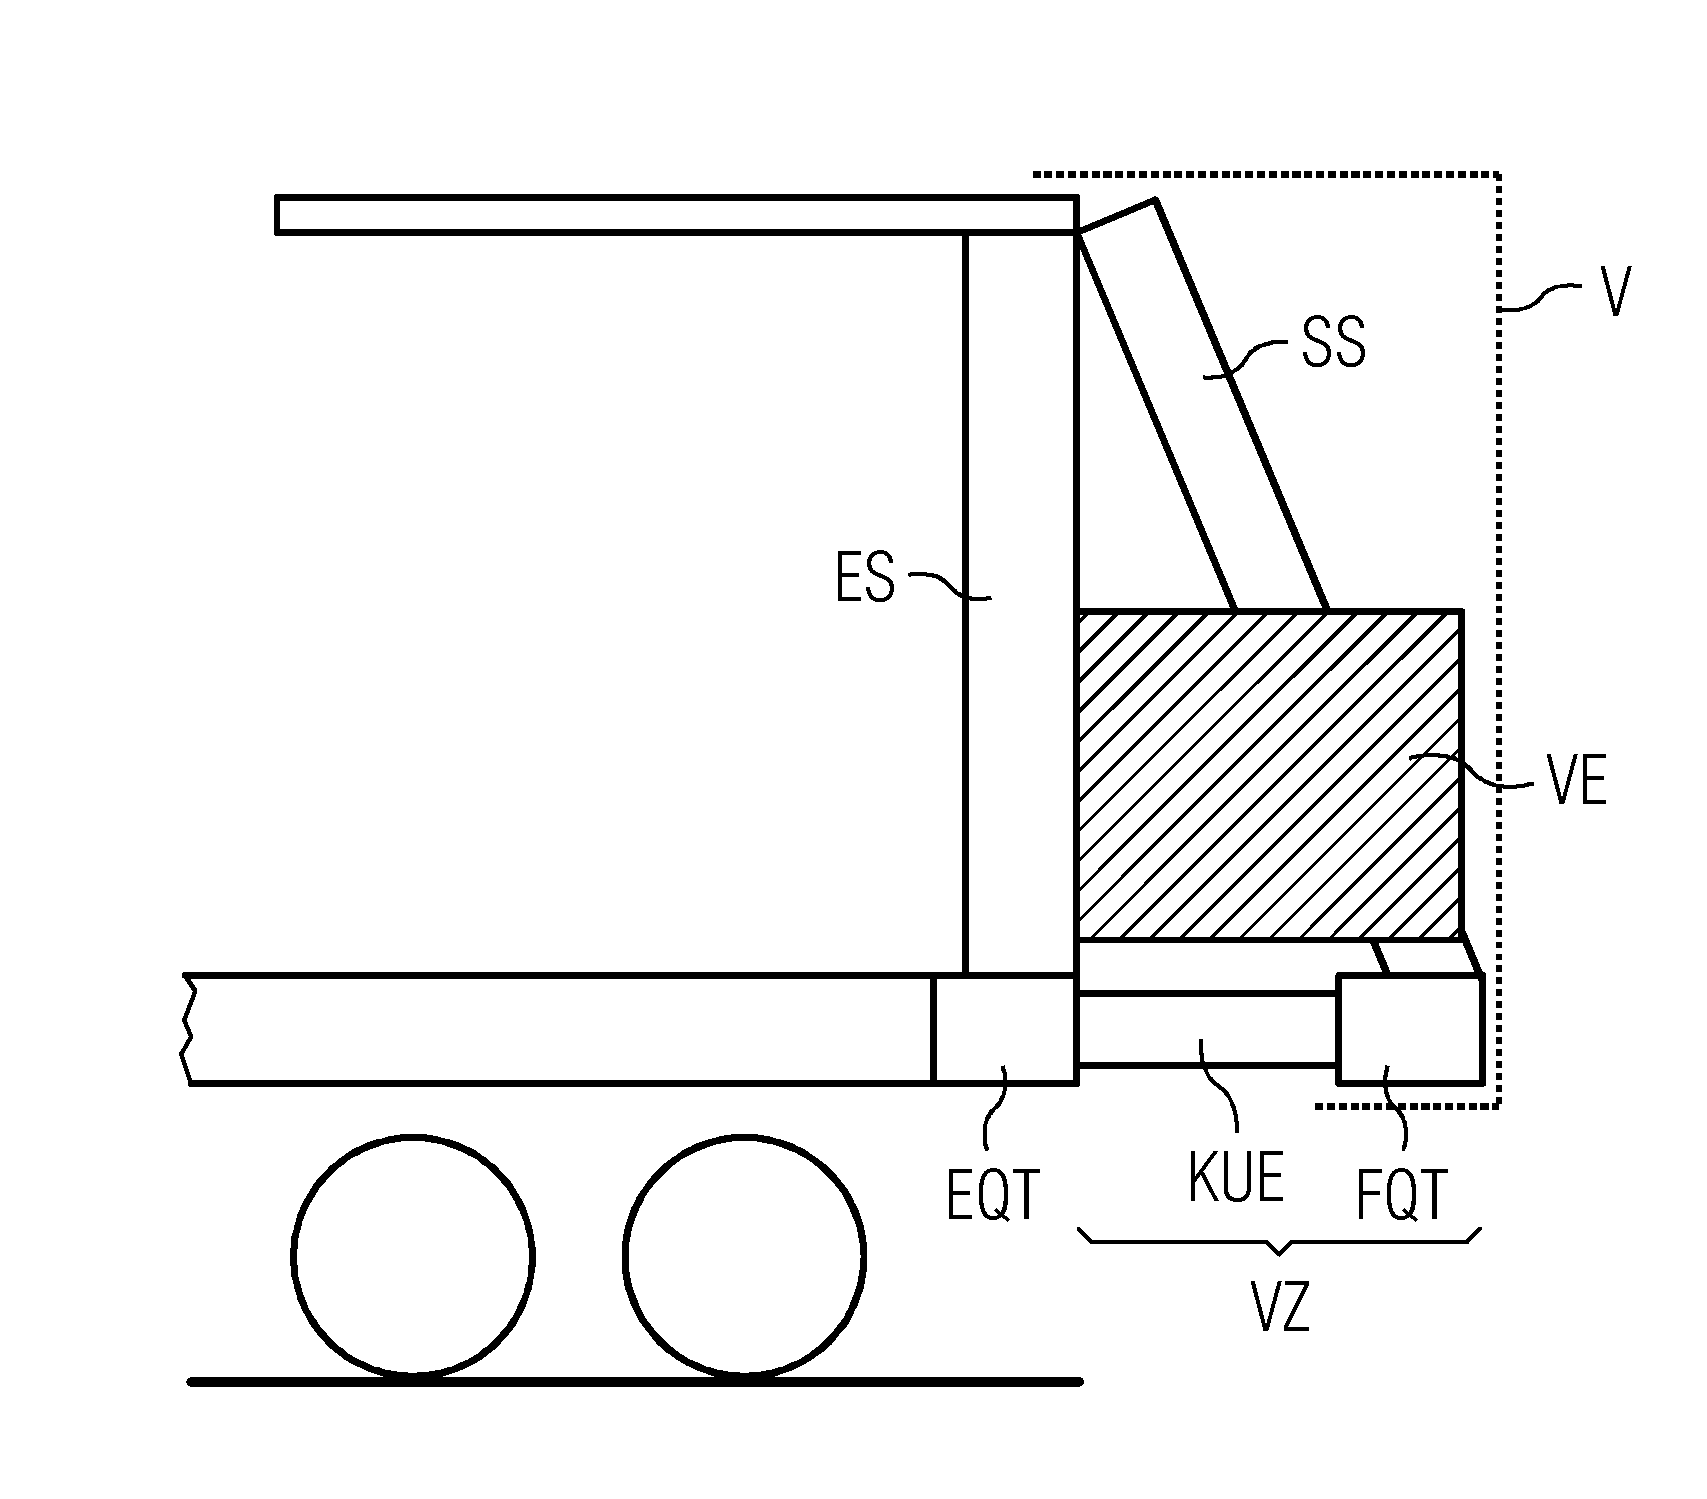 Rail vehicle having an attached deformation zone